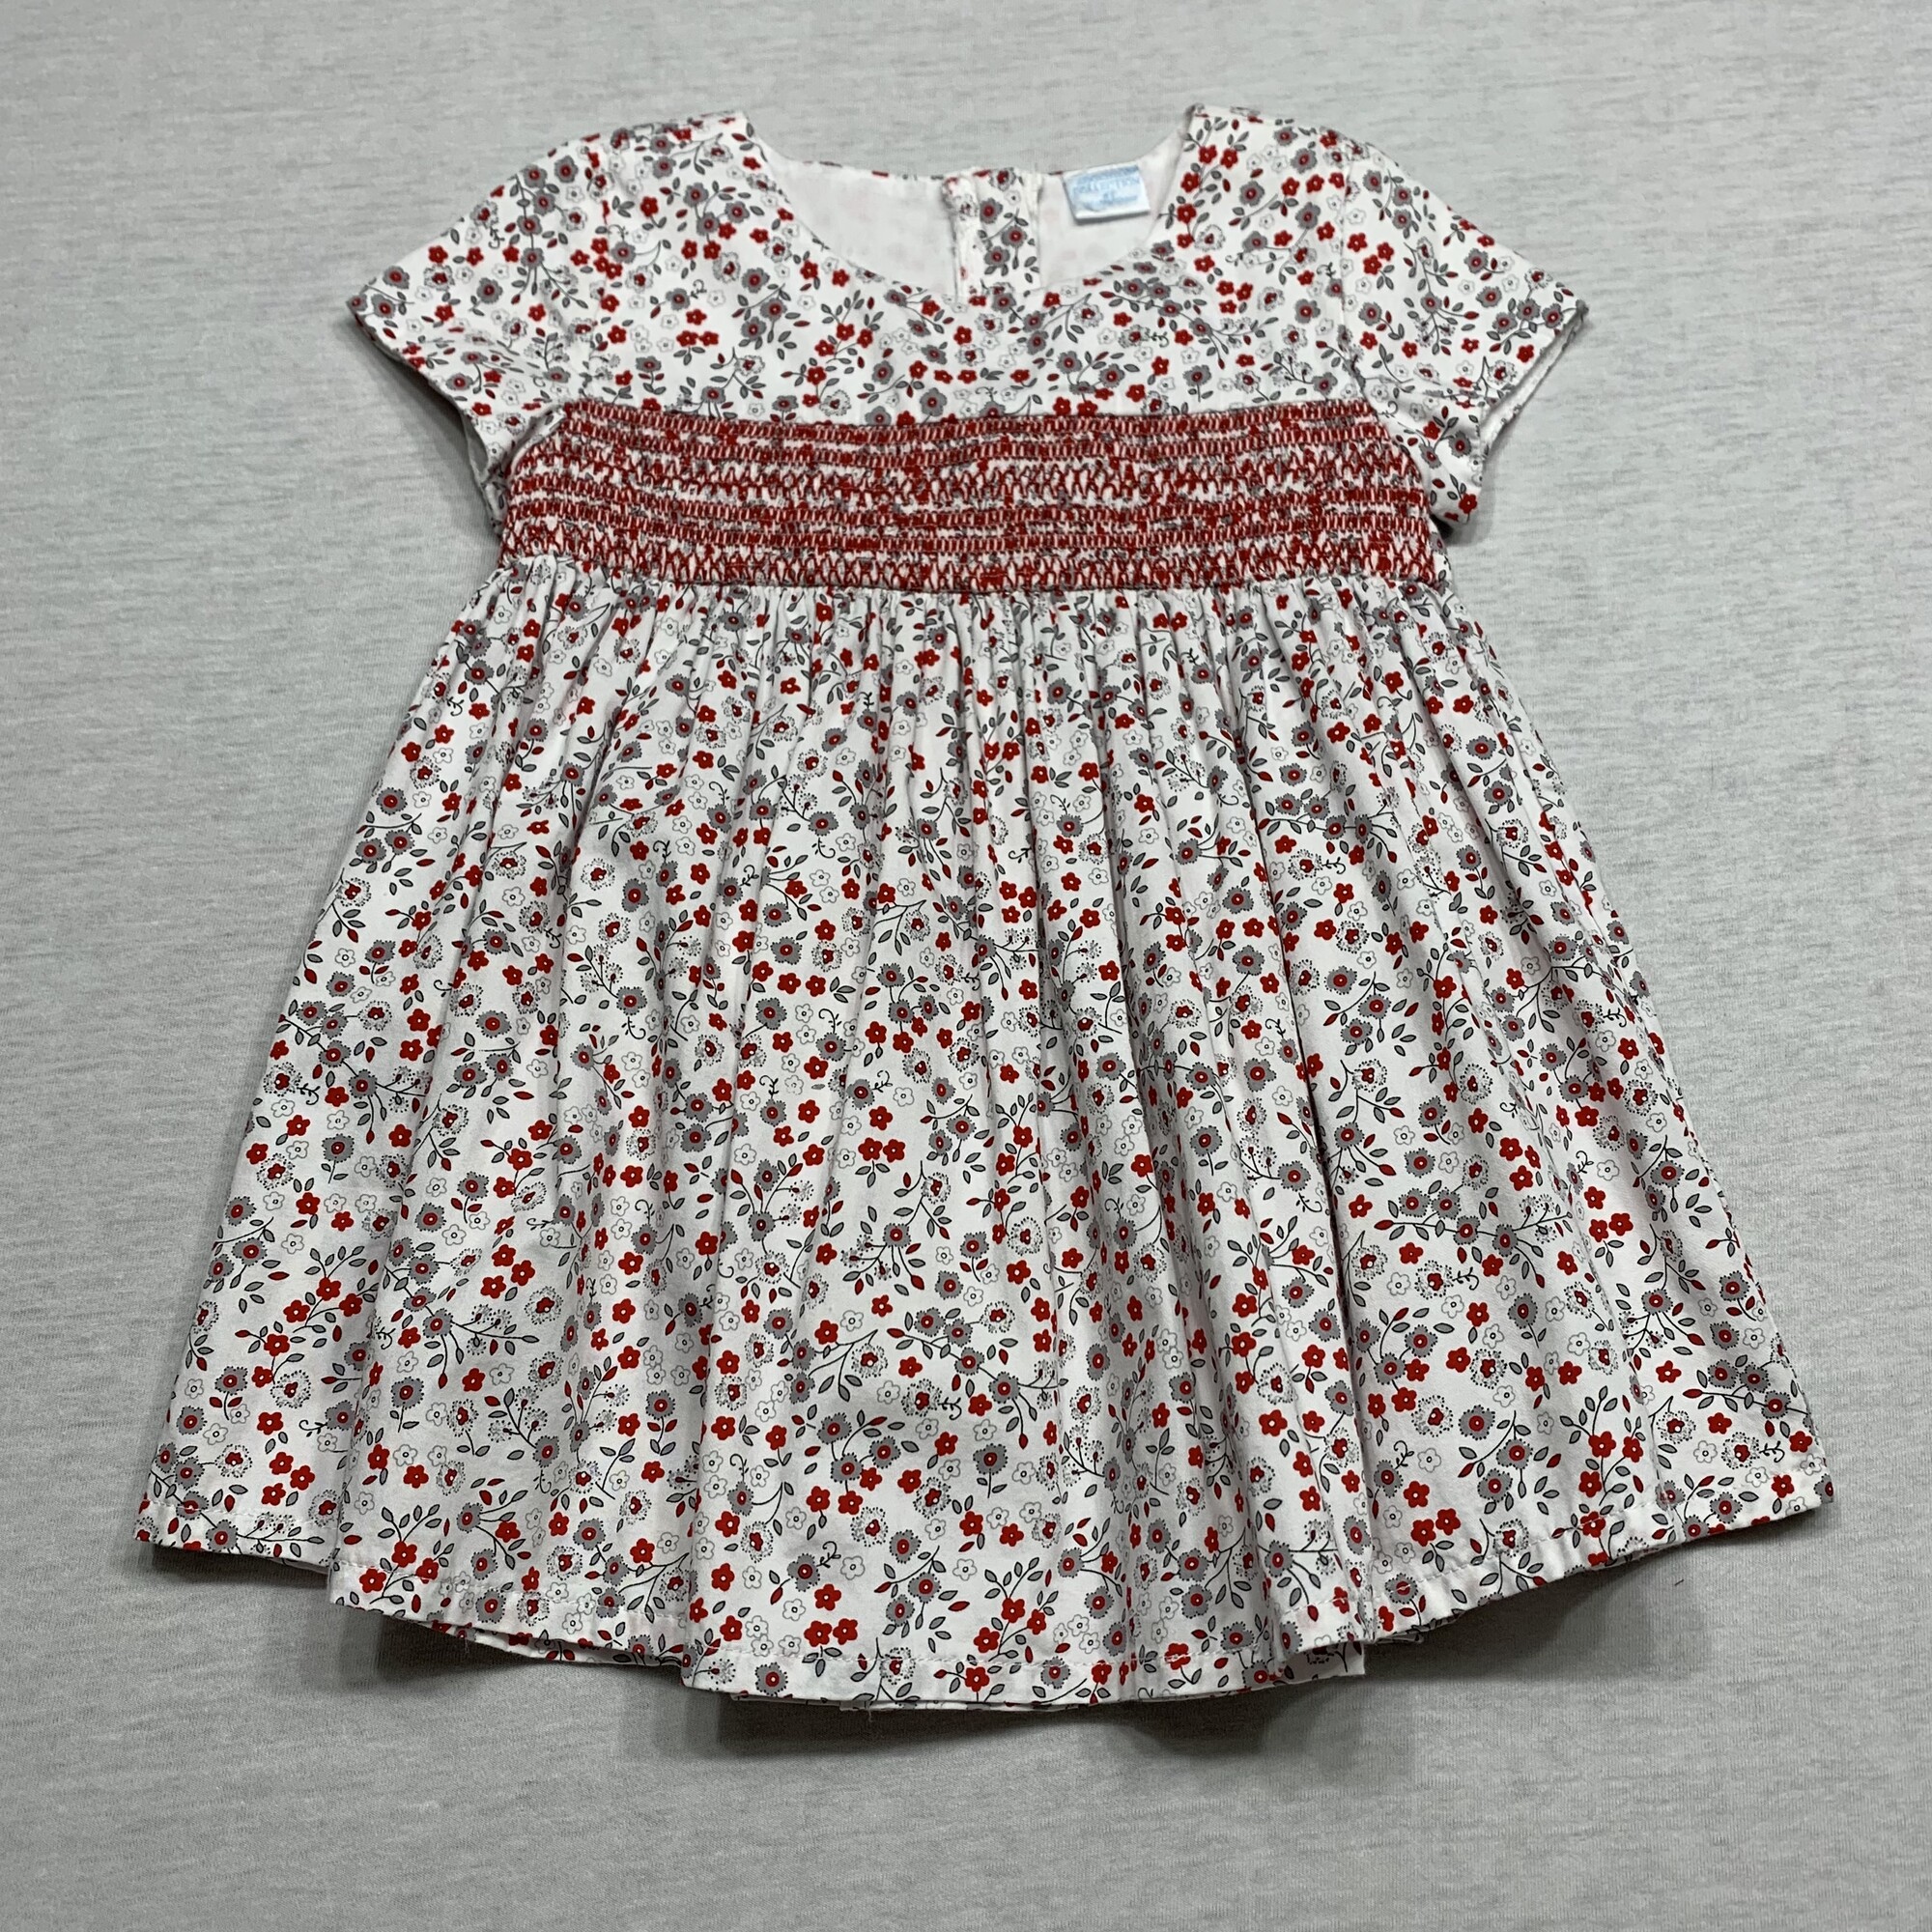 Smocked blouse with partial lining